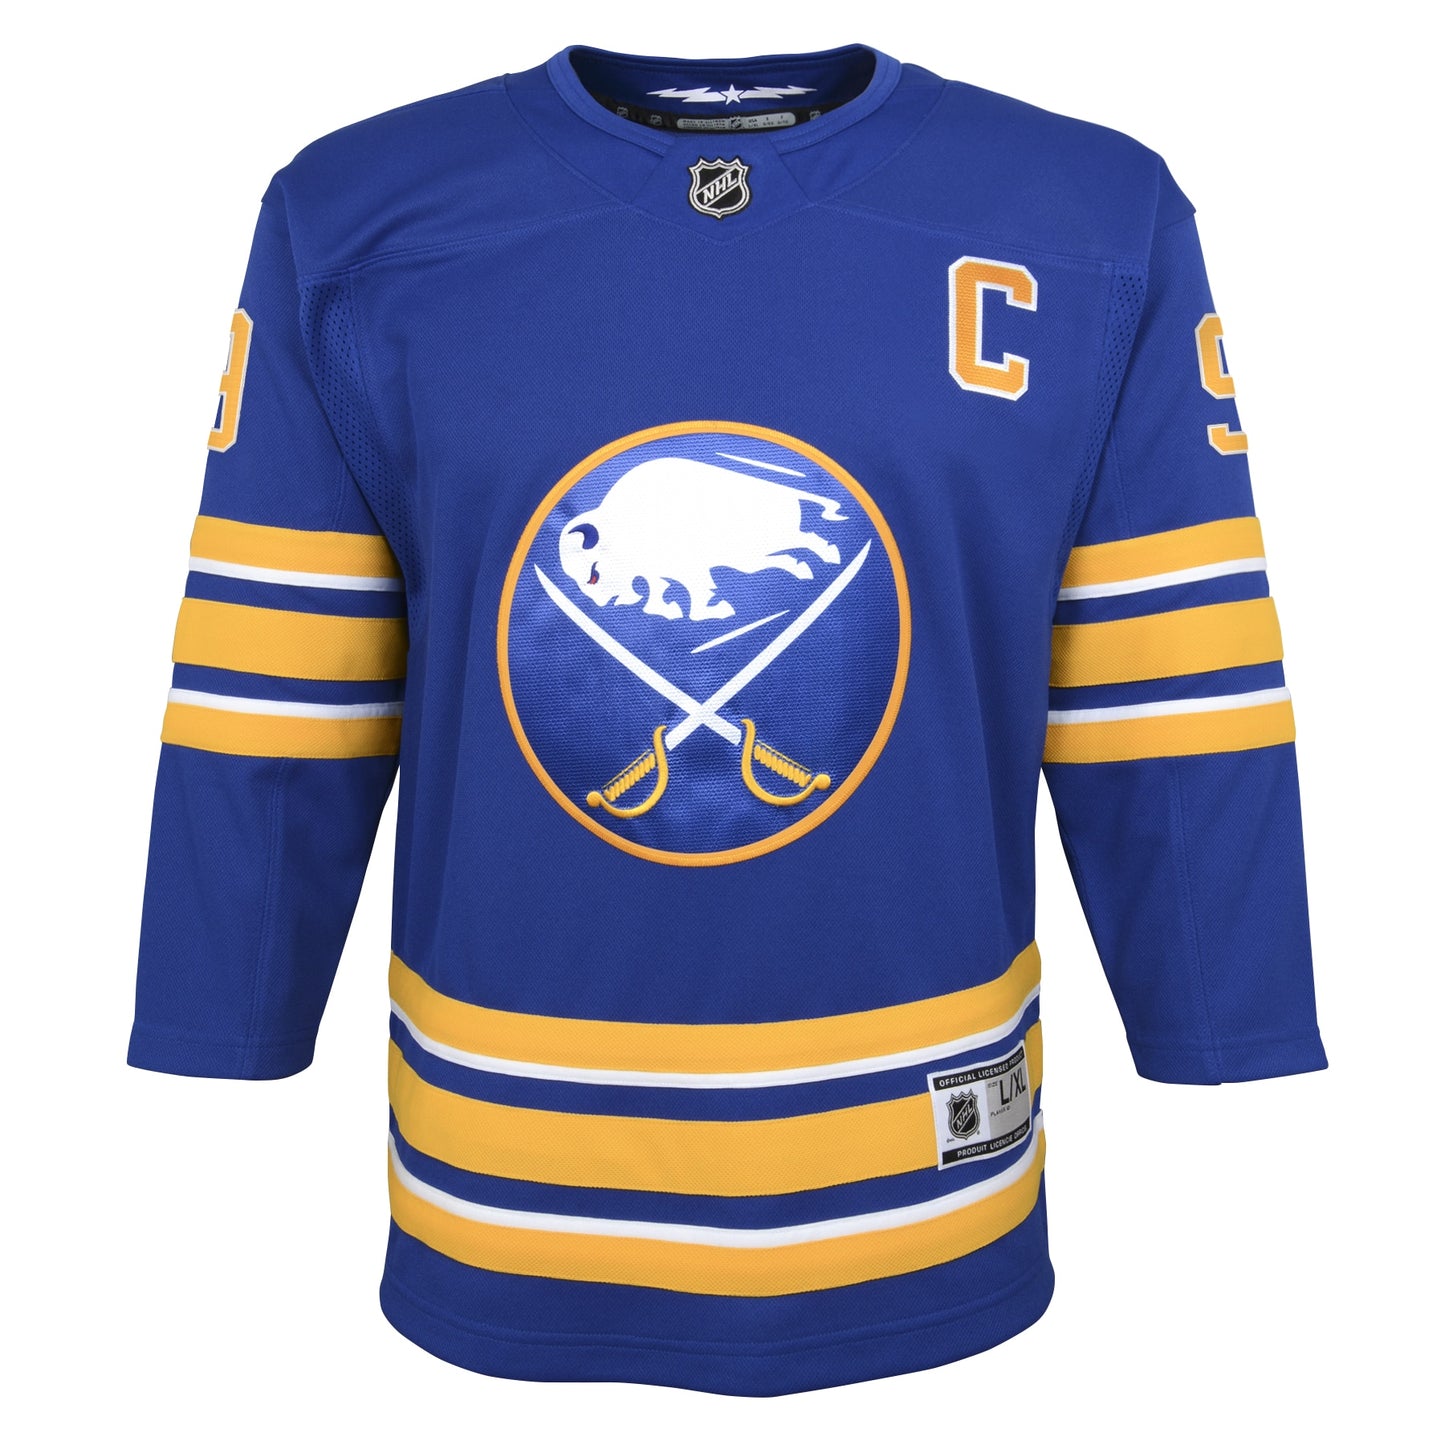 Jack Eichel Buffalo Sabres Youth Home Premier Player Jersey - Royal